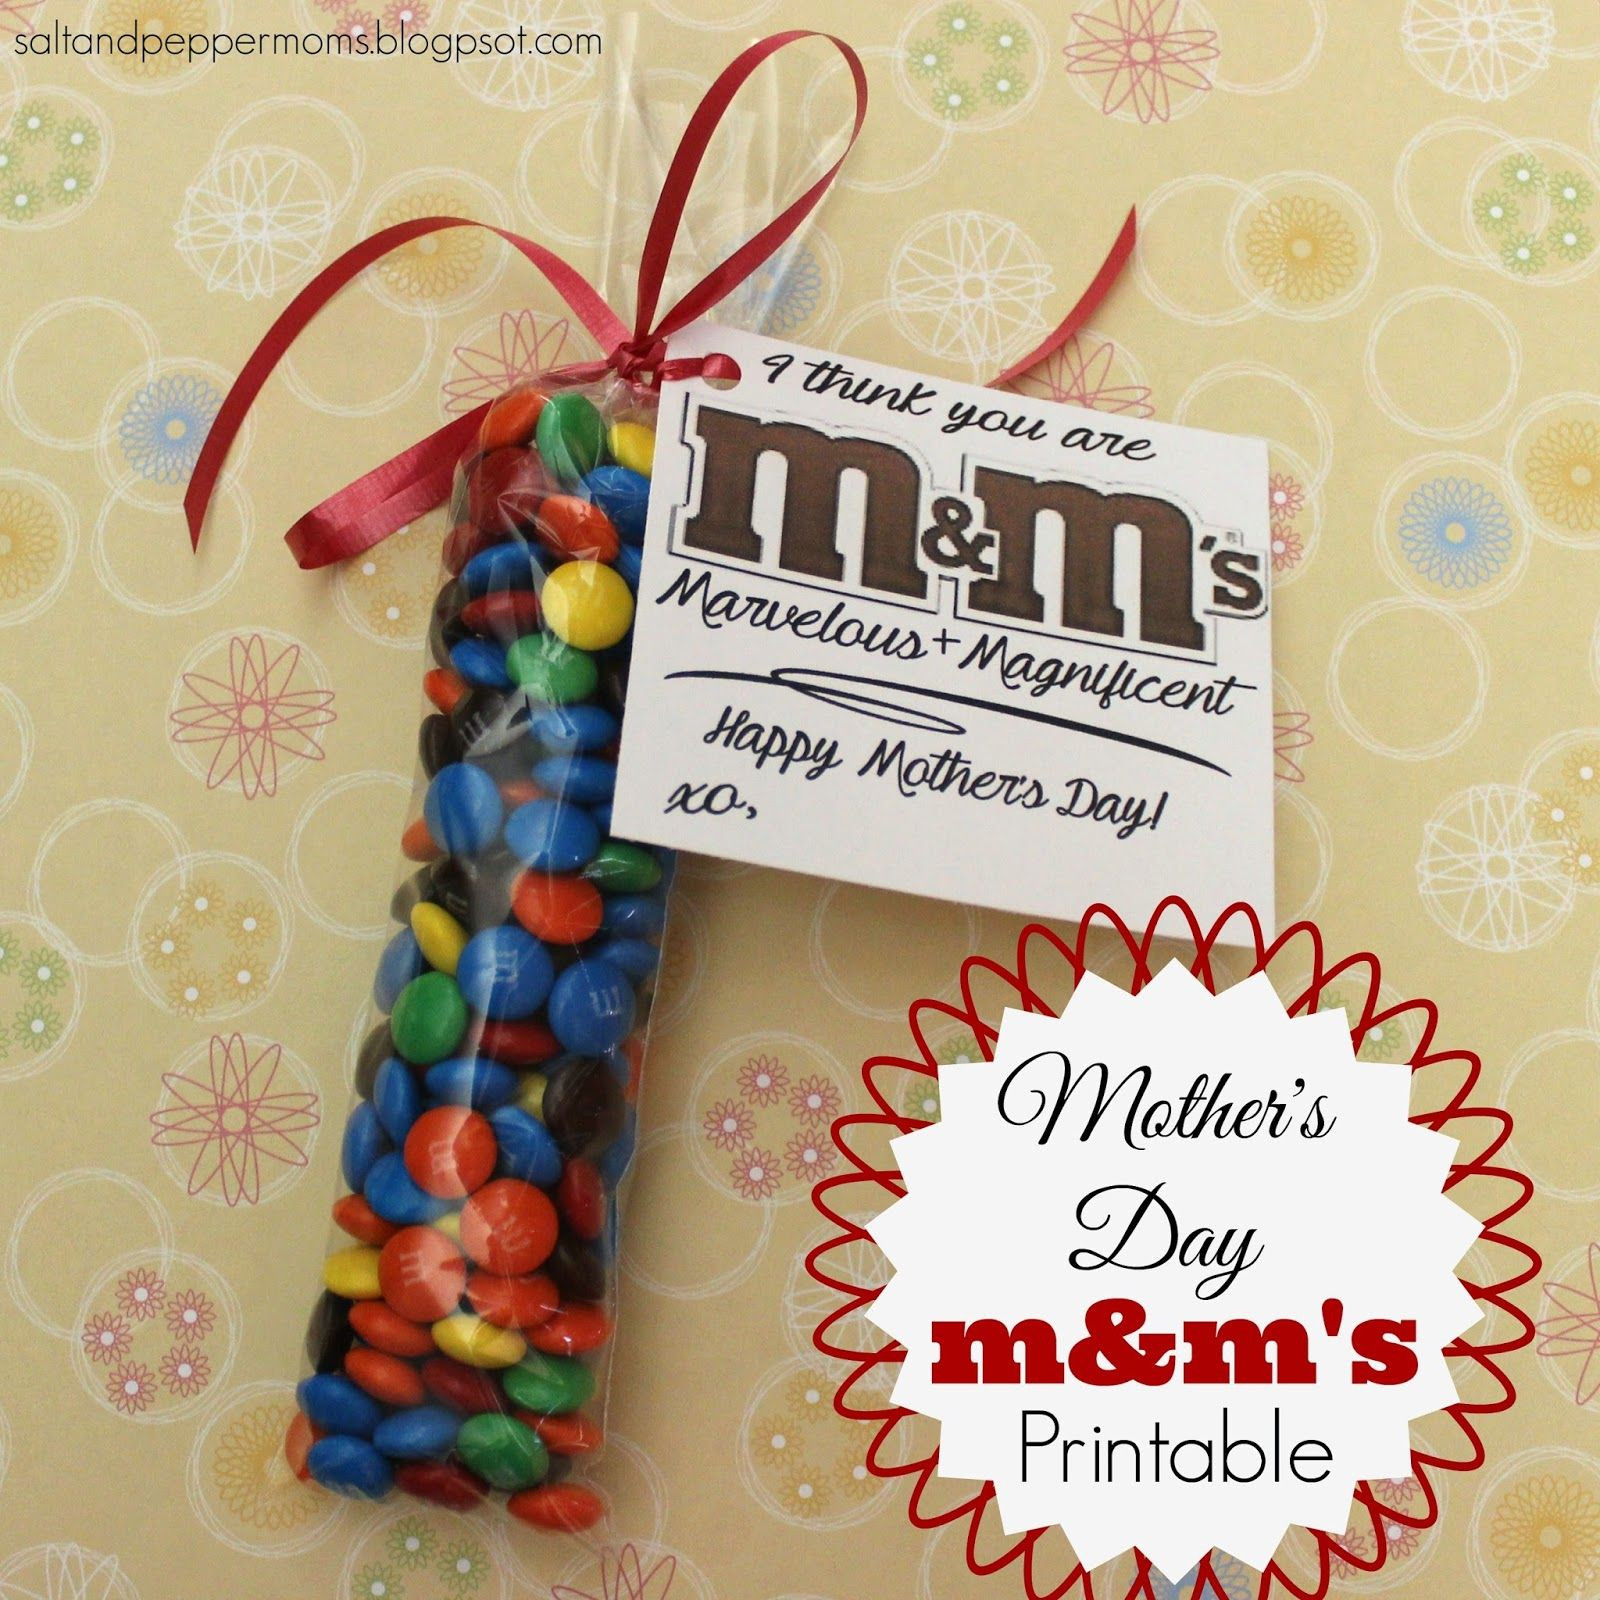 Church Mothers Day Ideas
 Salt and Pepper Moms free Mother s Day M&M s printable